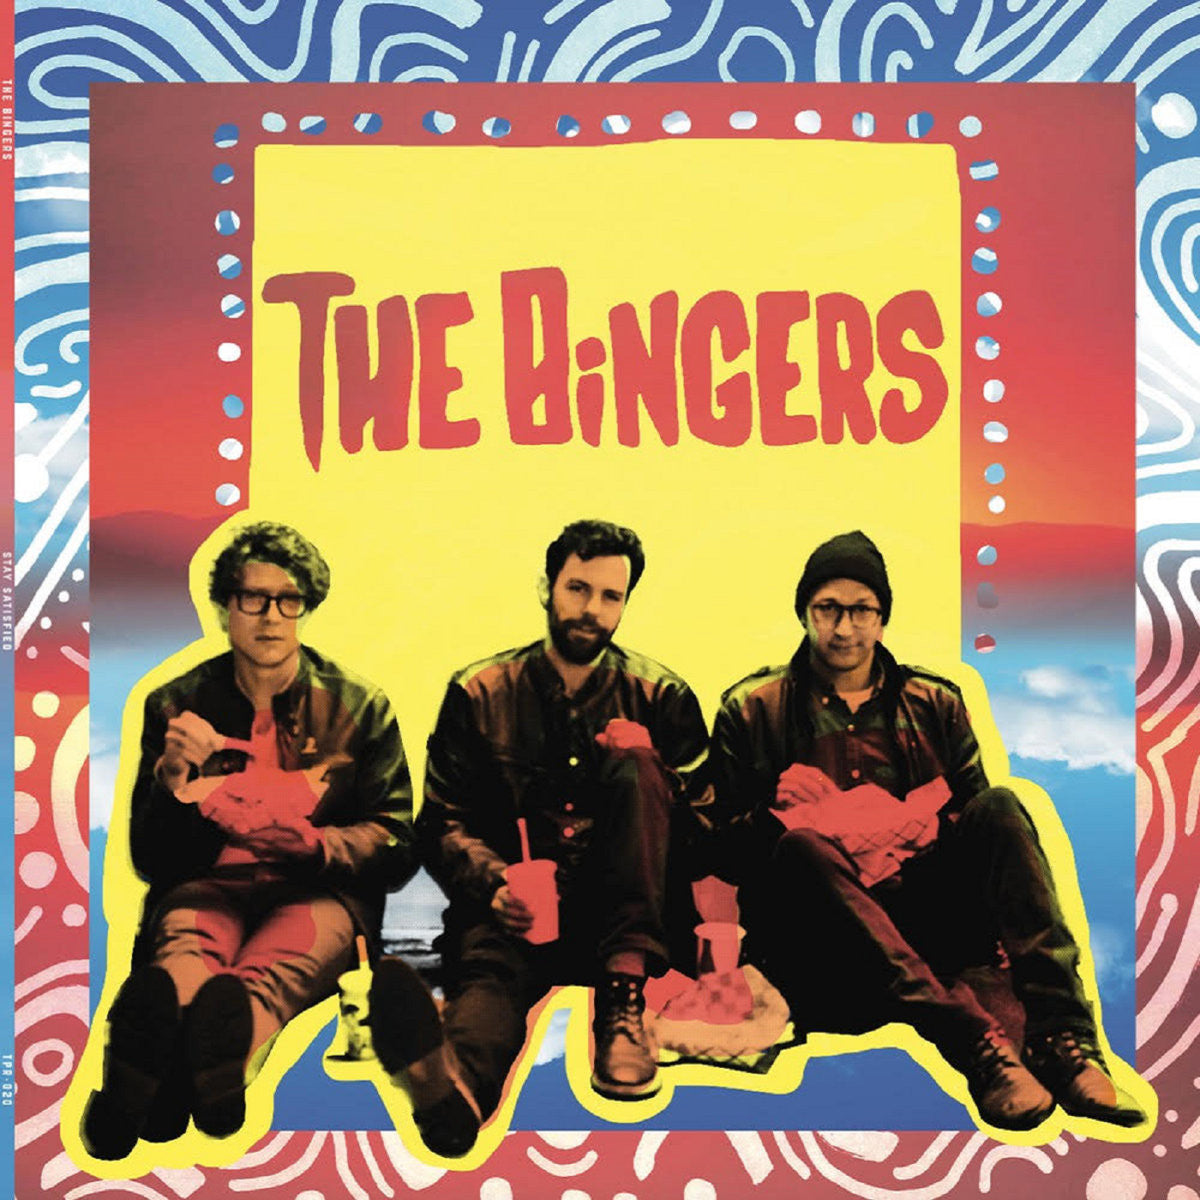 The Bingers - Stay Satisfied - New Vinyl Record 2017 Tall Pat Limited Edition Multi-Colored Vinyl (300 Copies!) w/ Download - Chicago, IL Garage/Punk